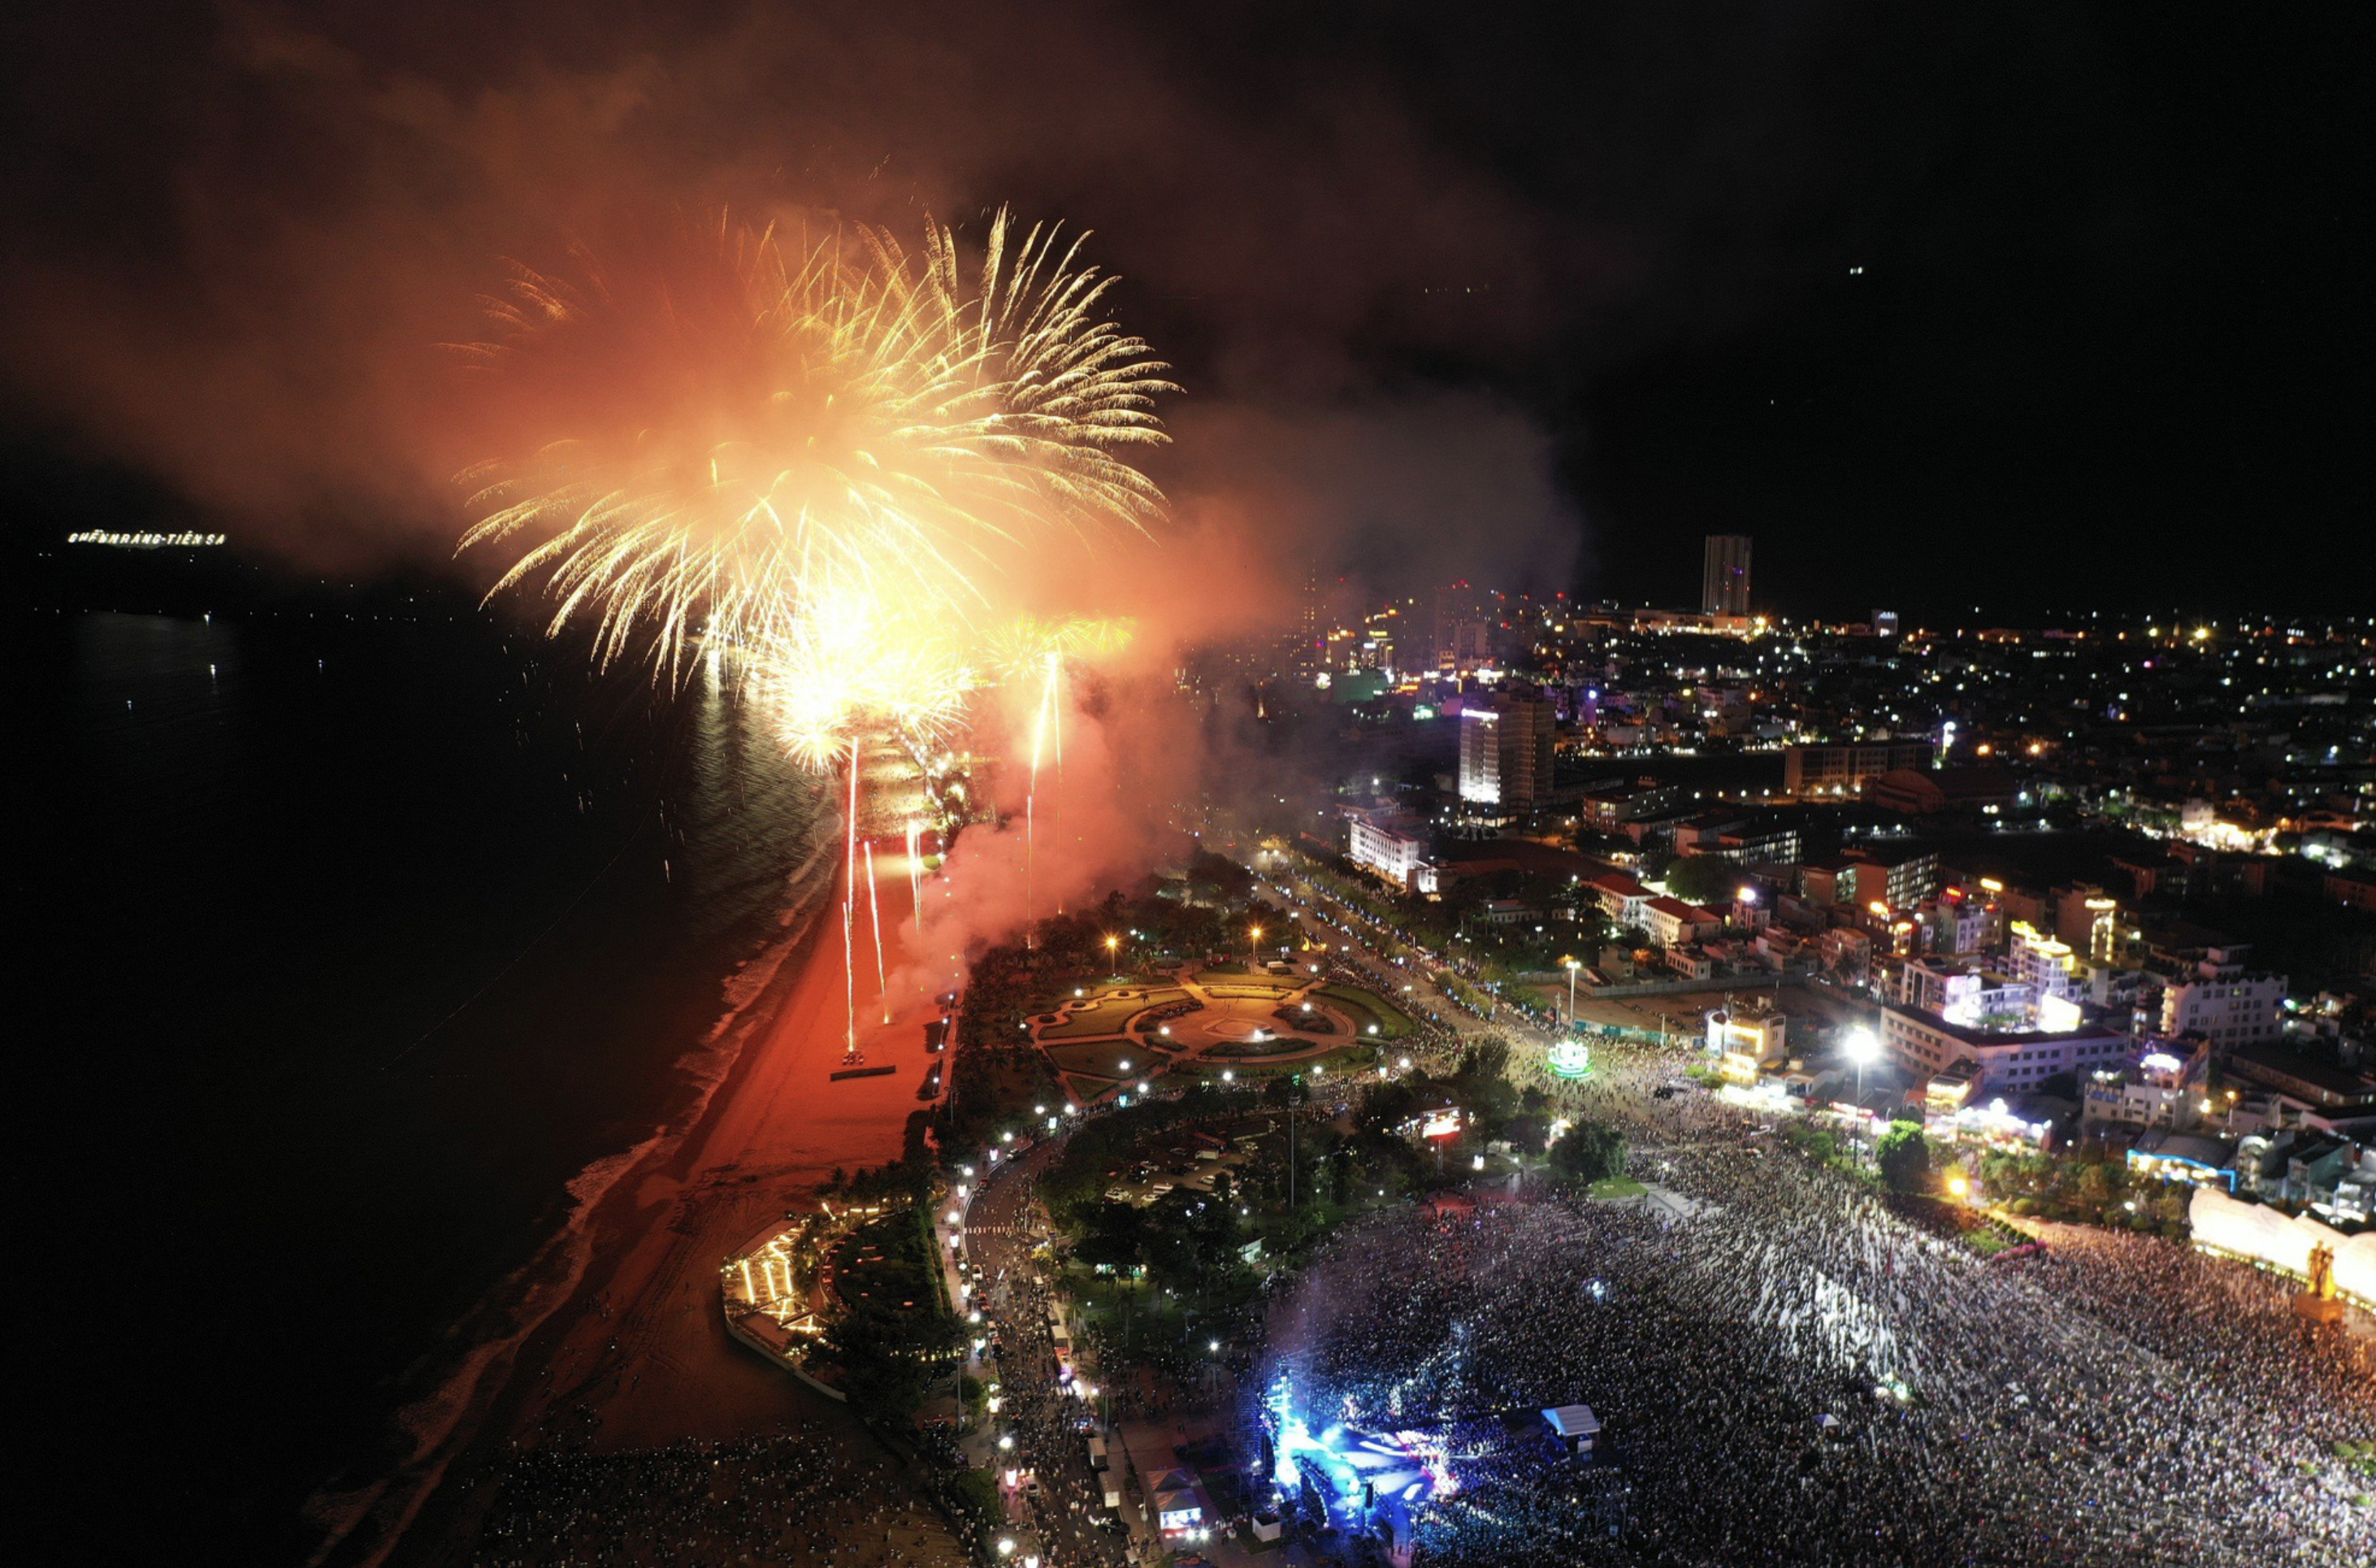 Thousands excitedly enjoy spectacular fireworks in Vietnam’s Quy Nhon City